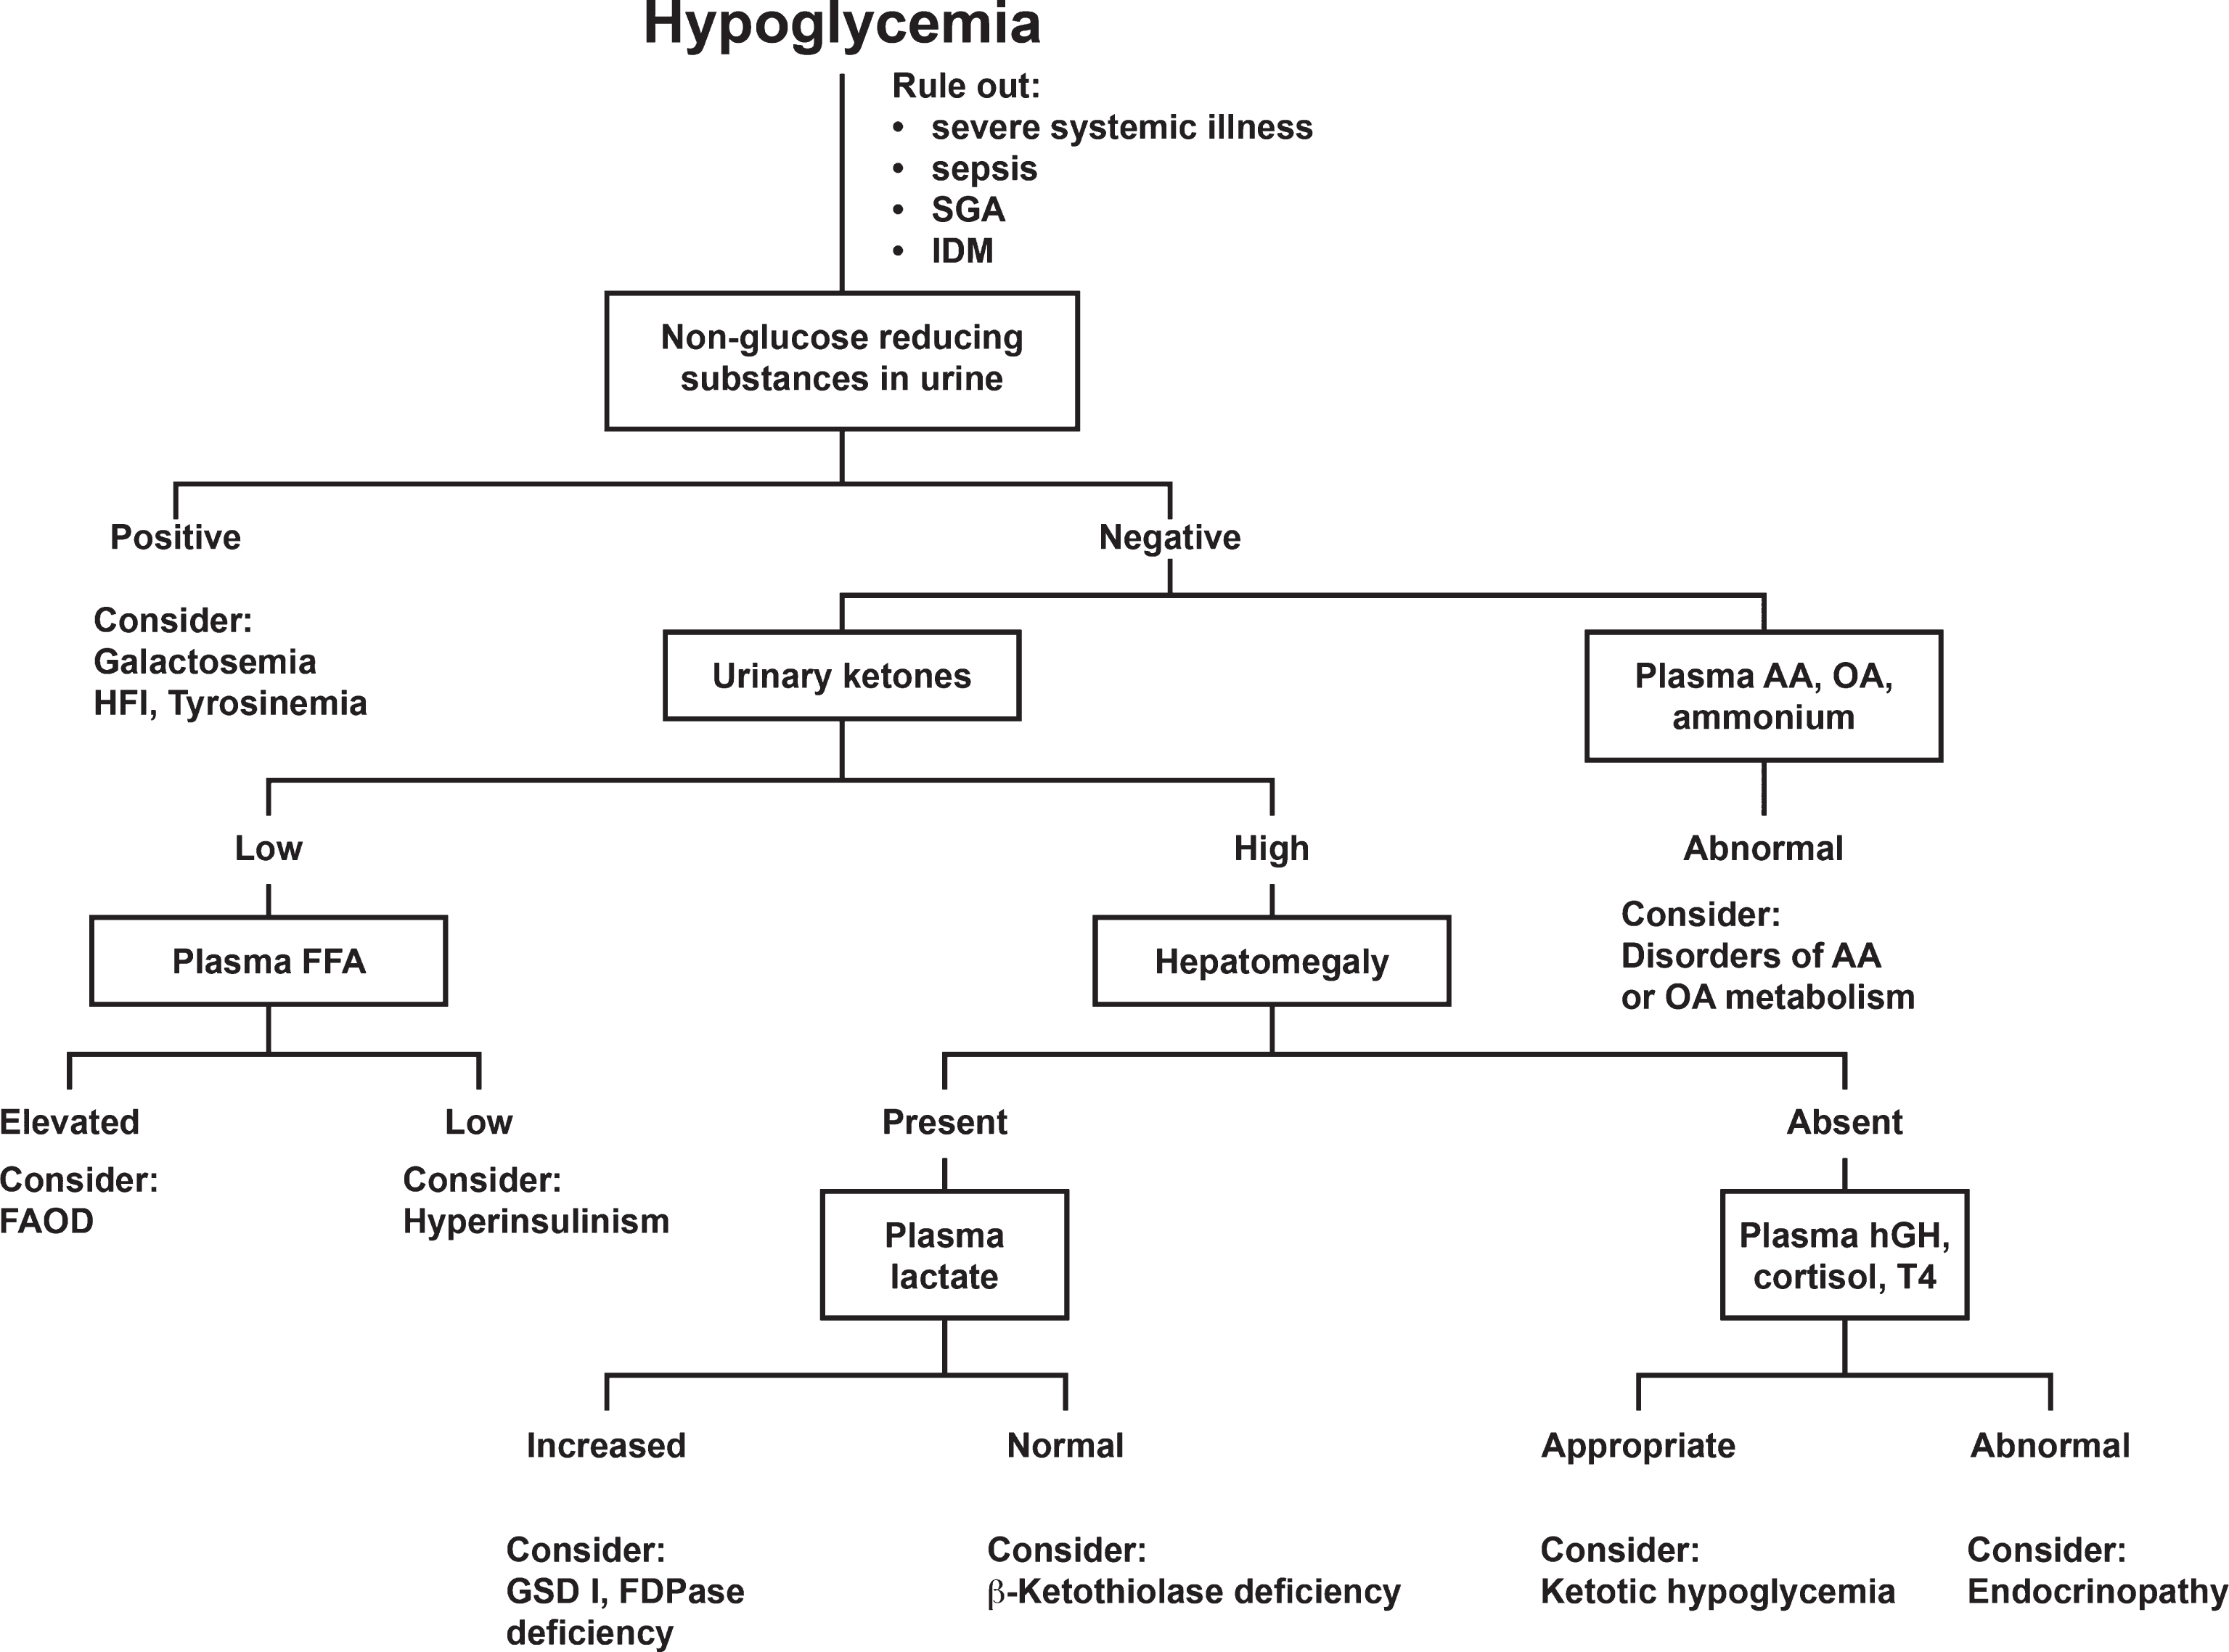 Approach to the differential diagnosis of hypoglycemia. Abbreviations: SGA, small for gestational age; IDM, infant of diabetic mother; HFI, hereditary fructose intolerance; AA, amino acids; OA, organic acids; FFA, free fatty acids; FAOD, fatty acid oxidation defect; hGH, human growth hormone; T4, thyroxine; GSD, glycogen storage disease; FDPase, fructose-6-diphosphatase. Clarke JTR, (Ed.): A Clinical Guide to Inherited Metabolic Diseases – 3rd ed., Cambridge University Press, 2006.